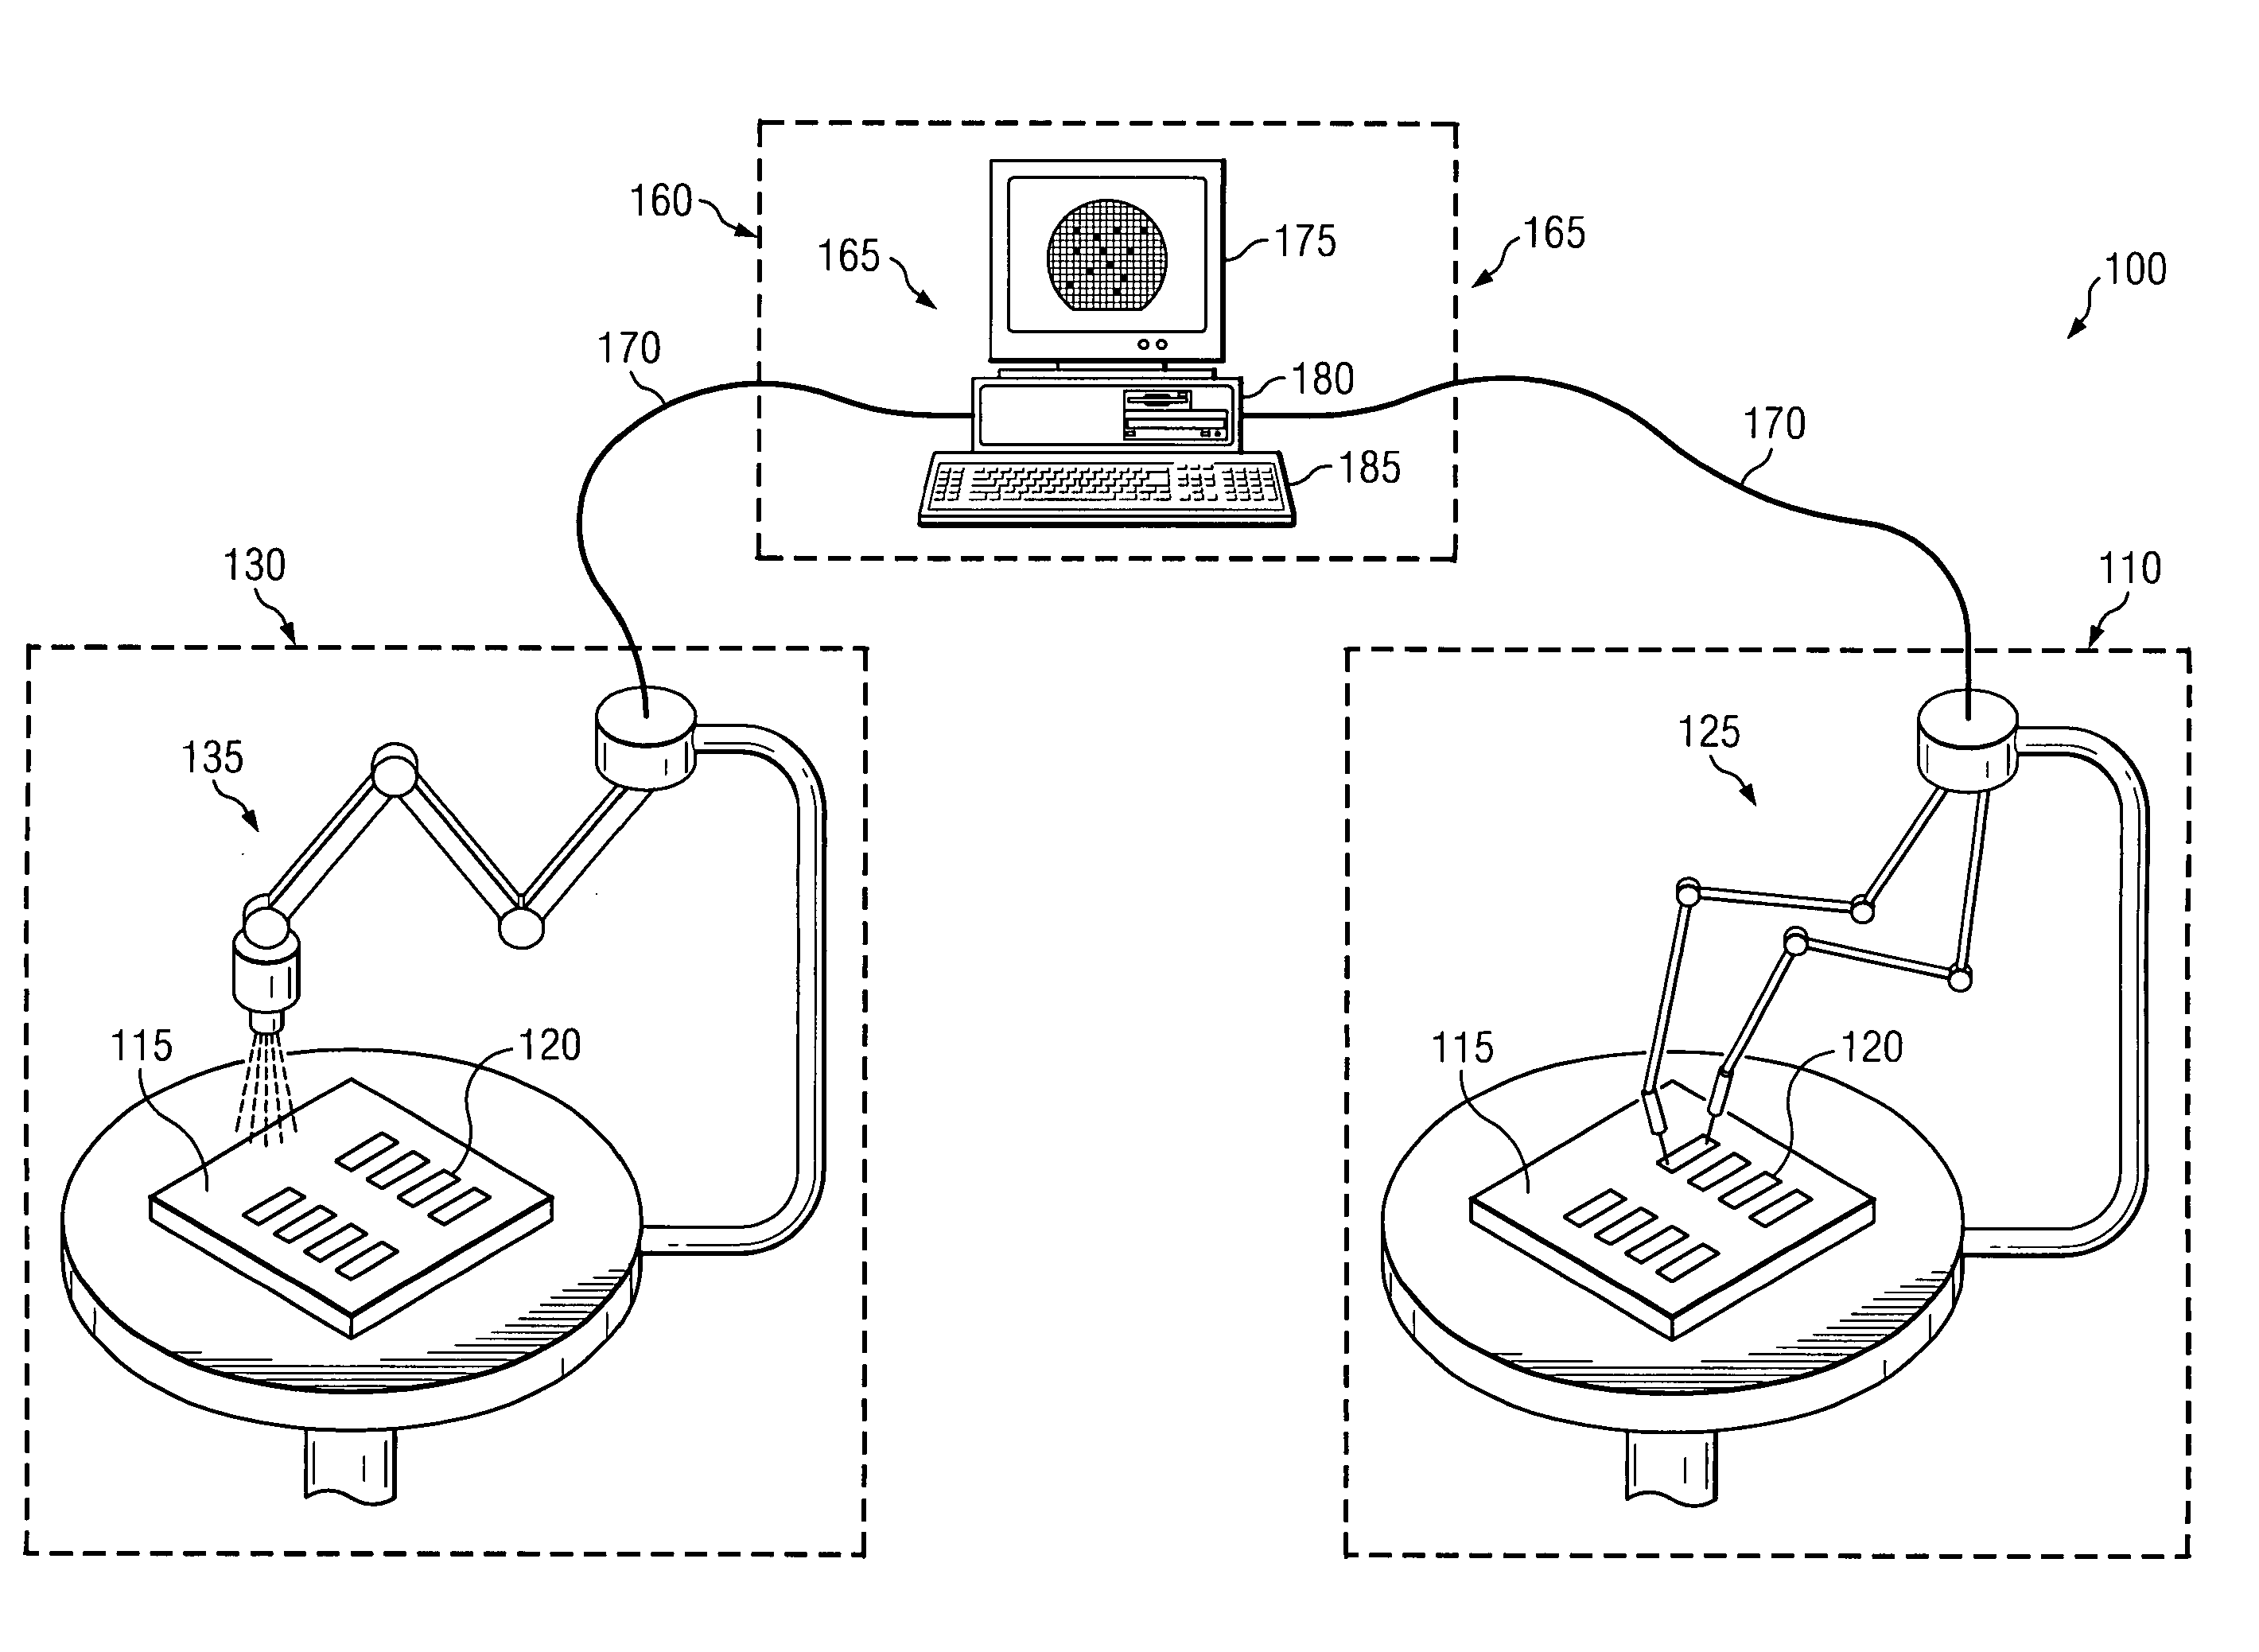 Method for analyzing critical defects in analog integrated circuits